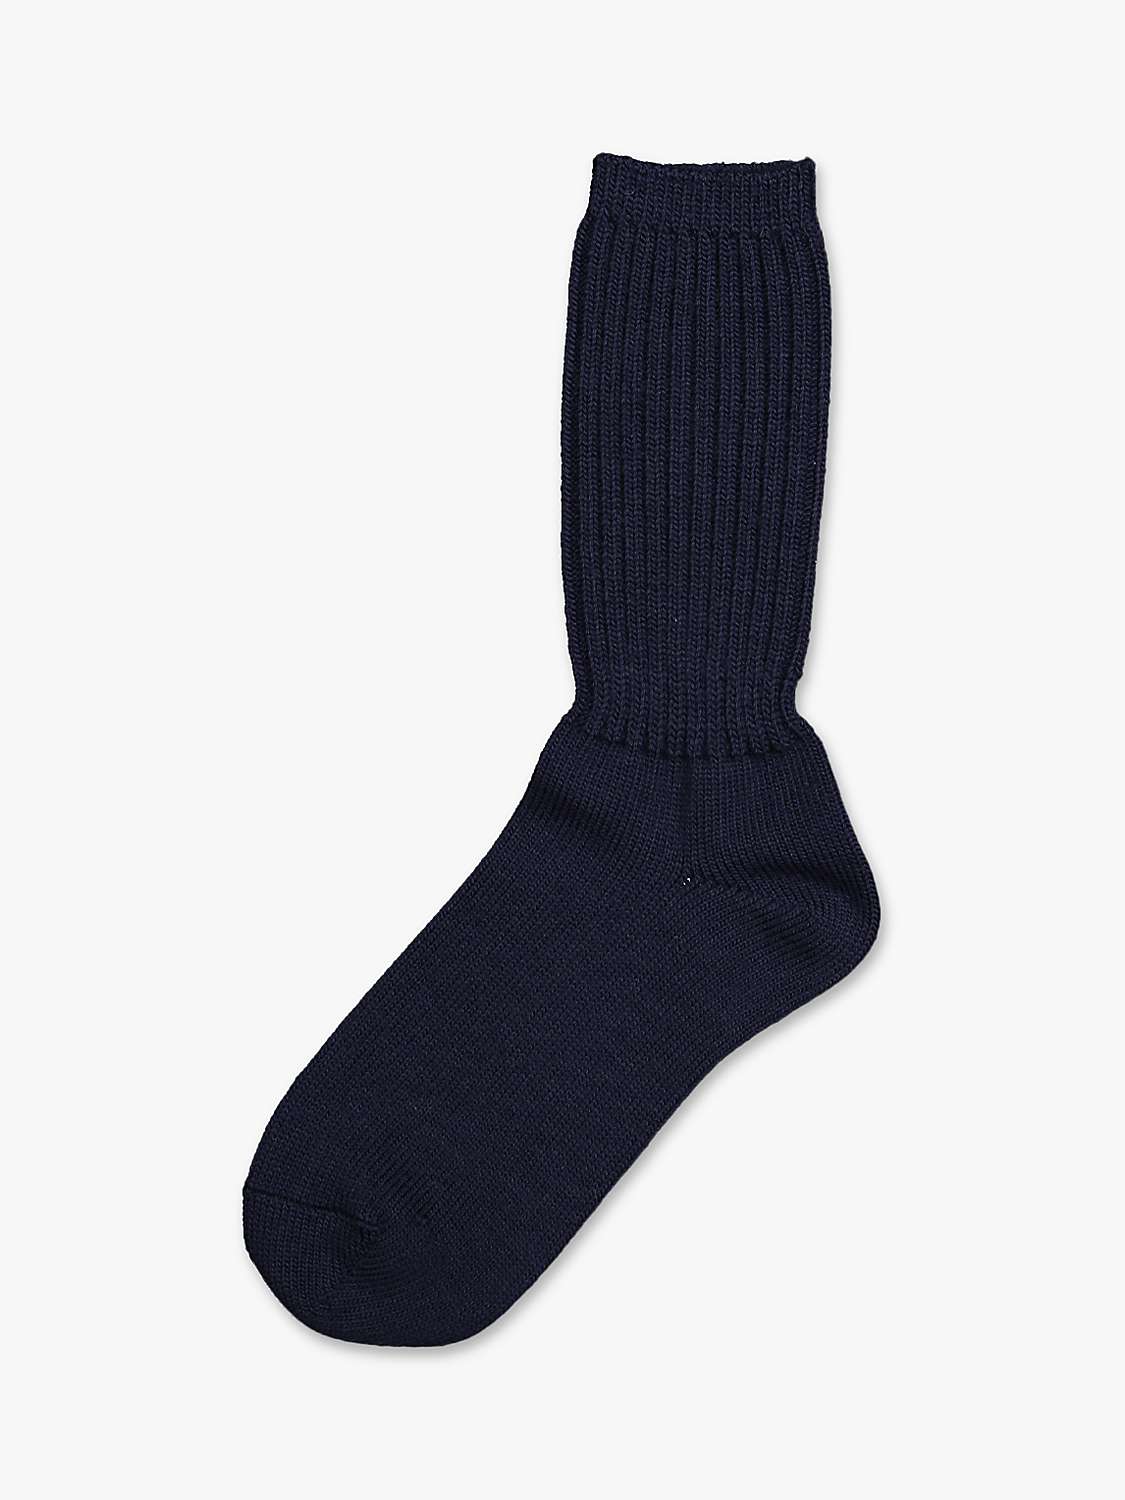 Buy Polarn O. Pyret Baby Thick Wool Socks Online at johnlewis.com